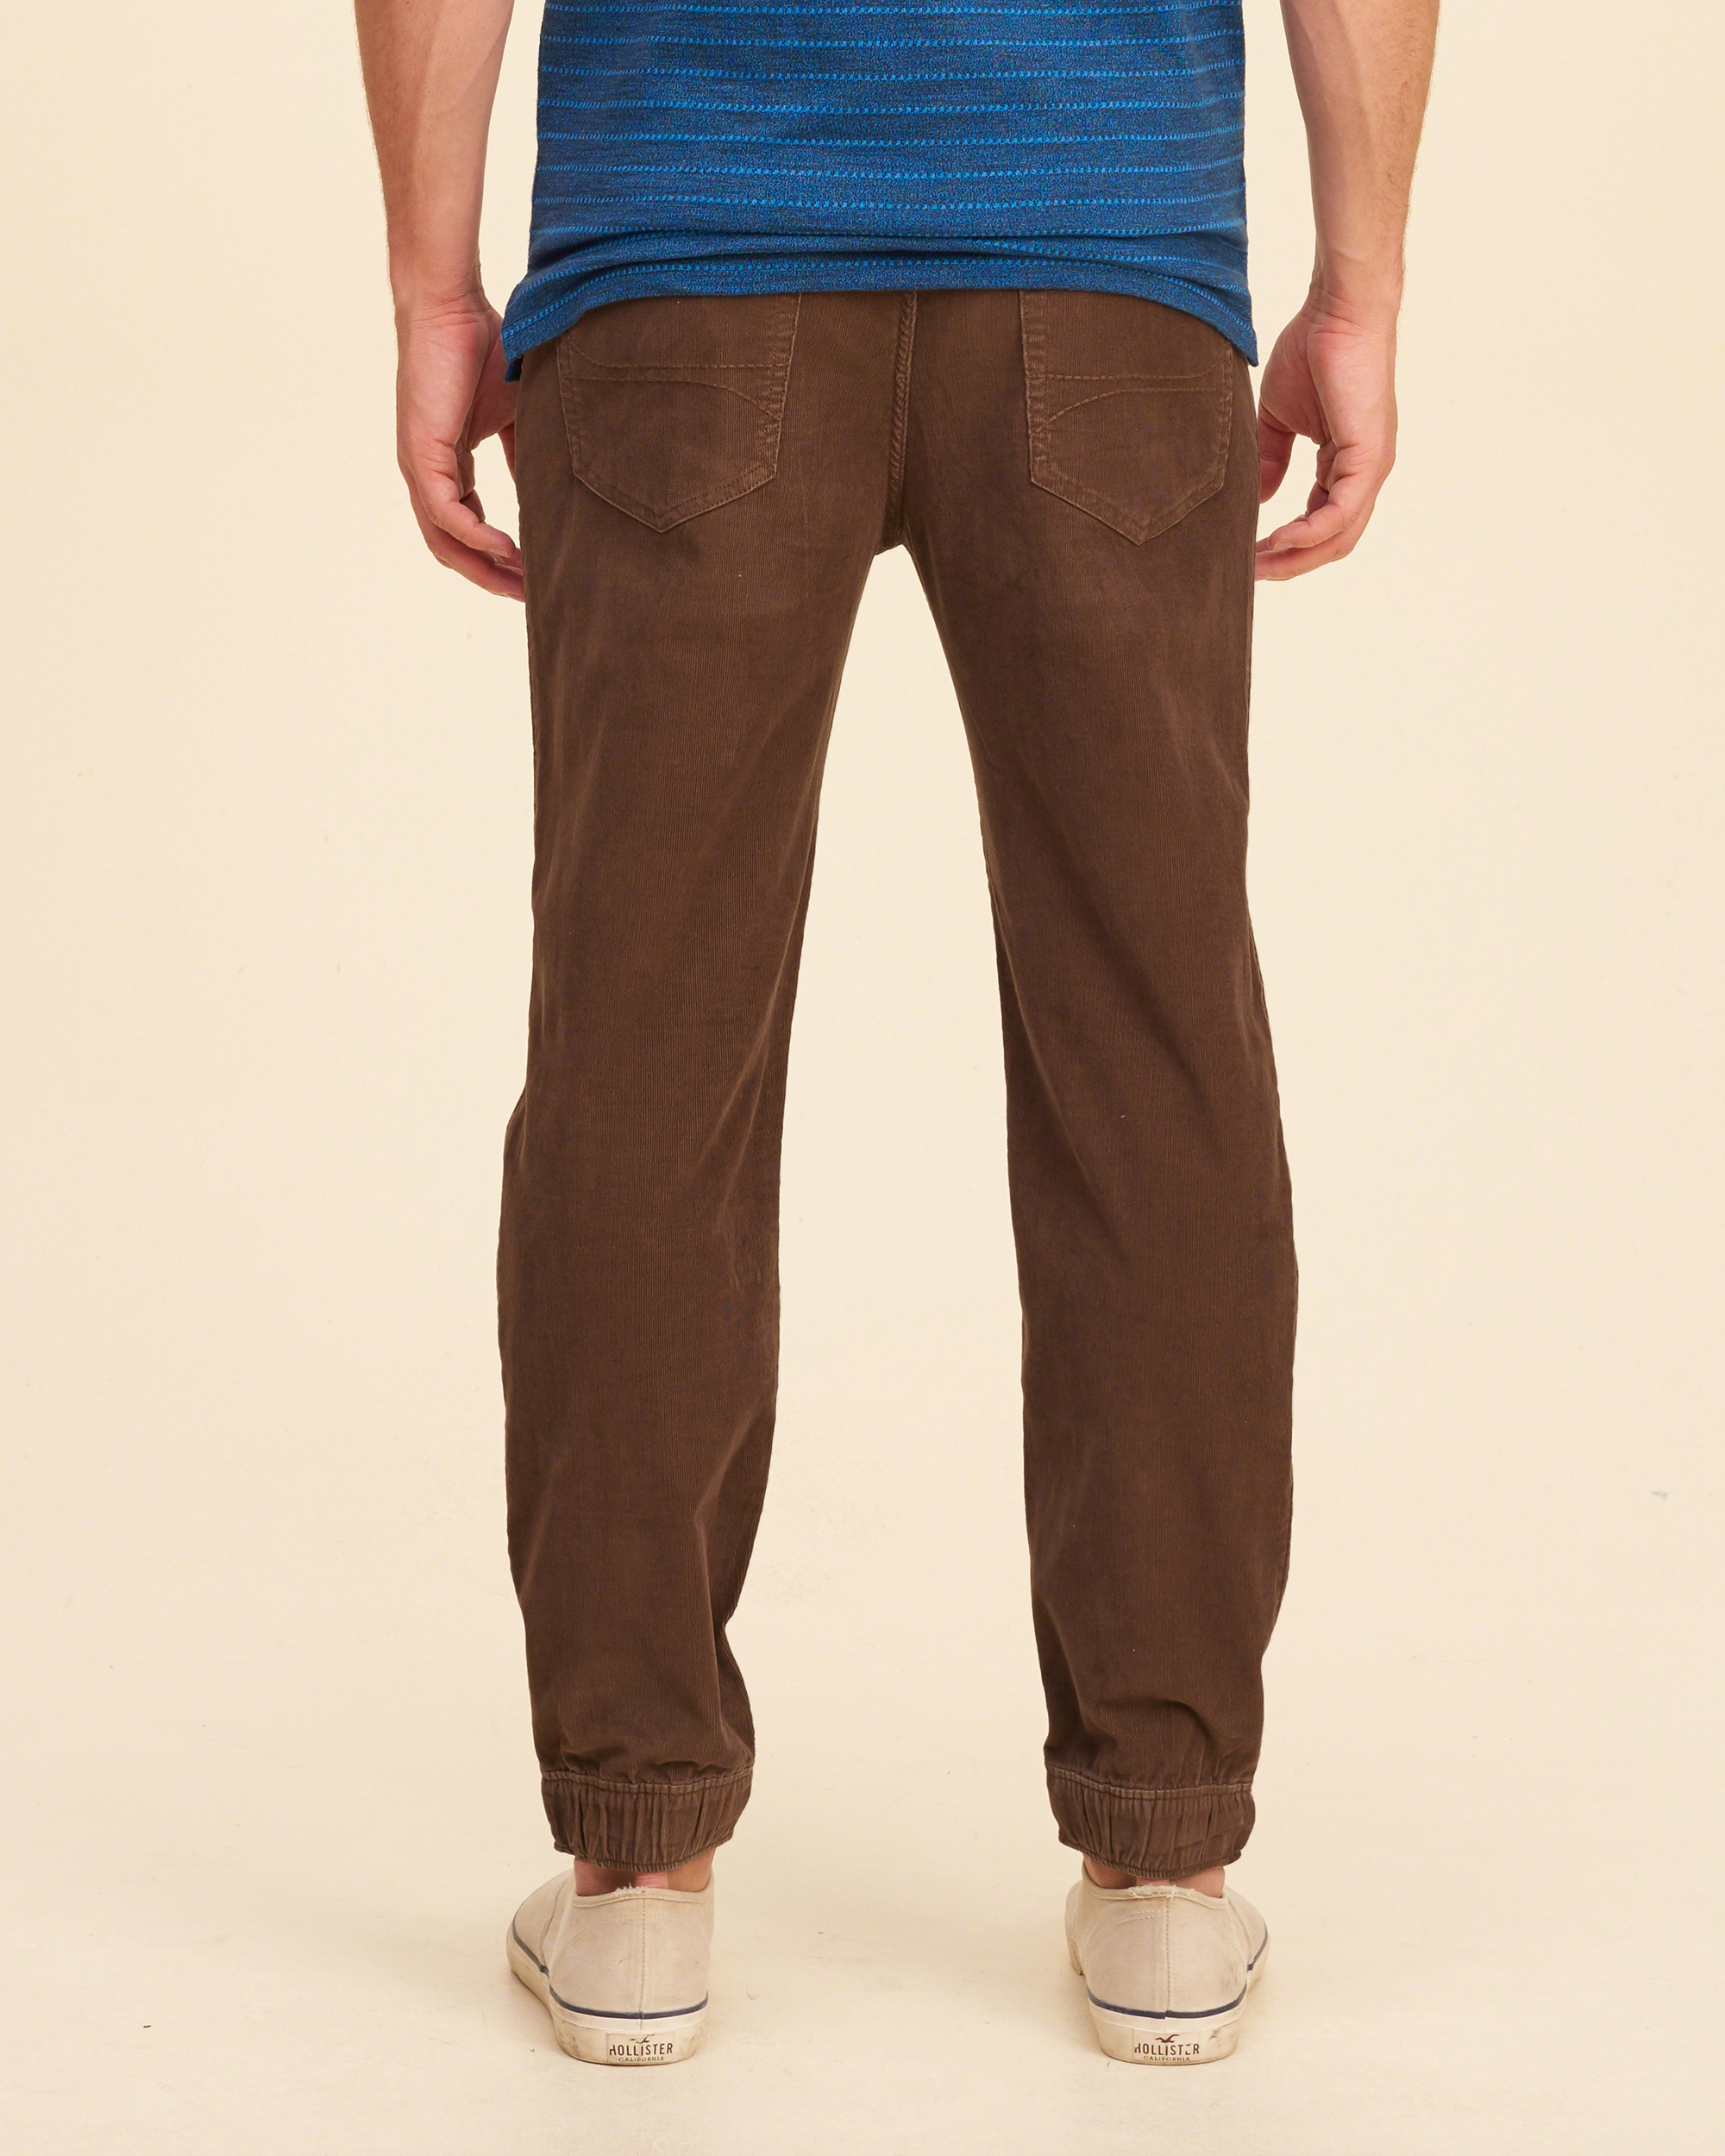 Hollister Corduroy Jogger Pants in Brown for Men - Lyst